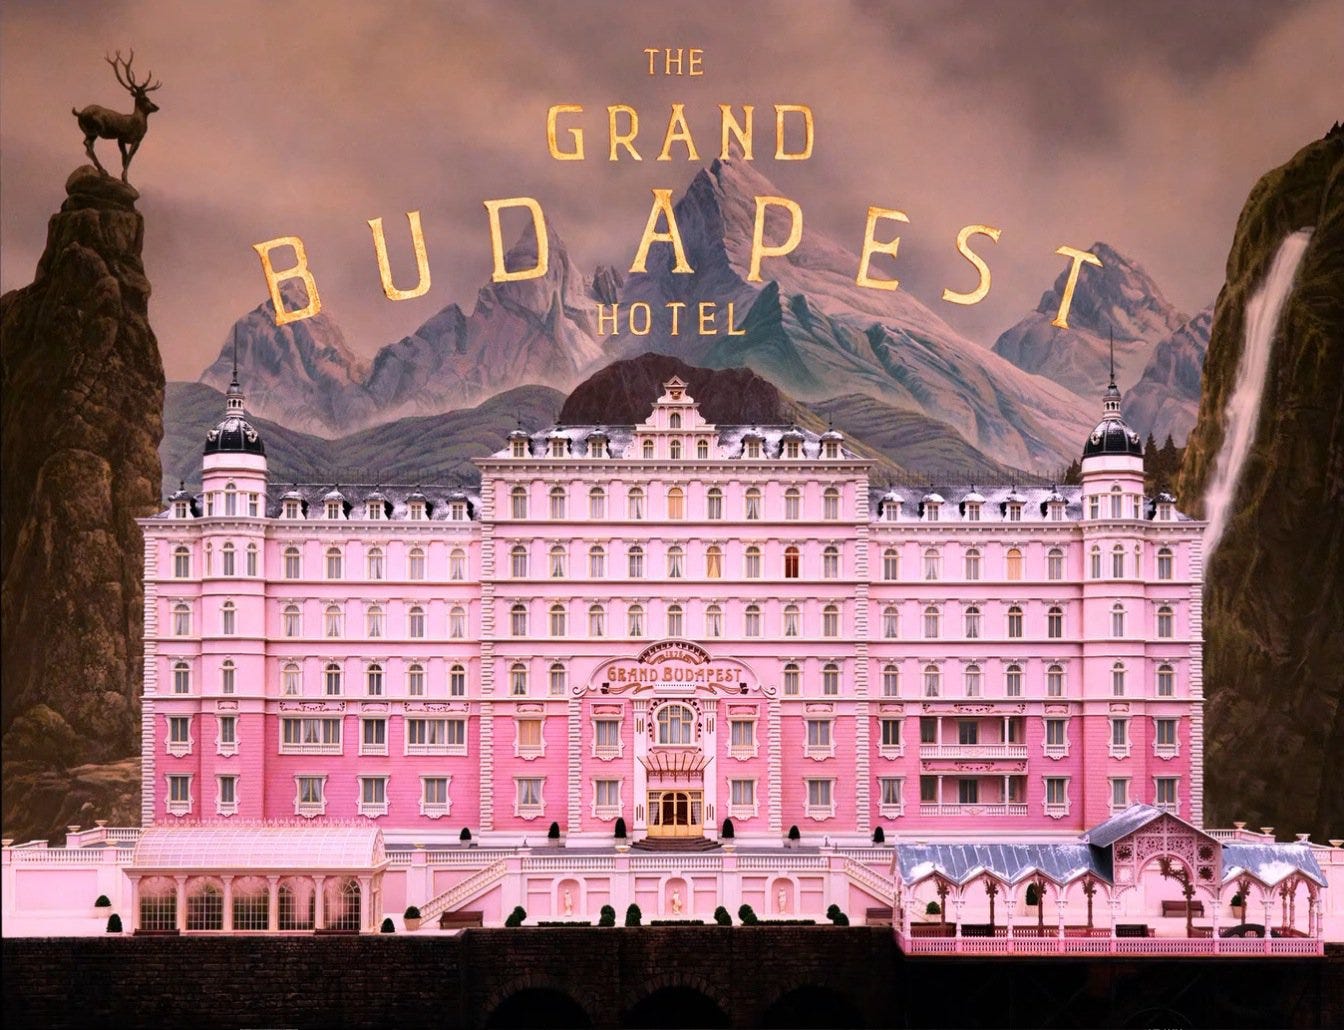 Scene depecting the Grand Budapest Hotel in bright pink